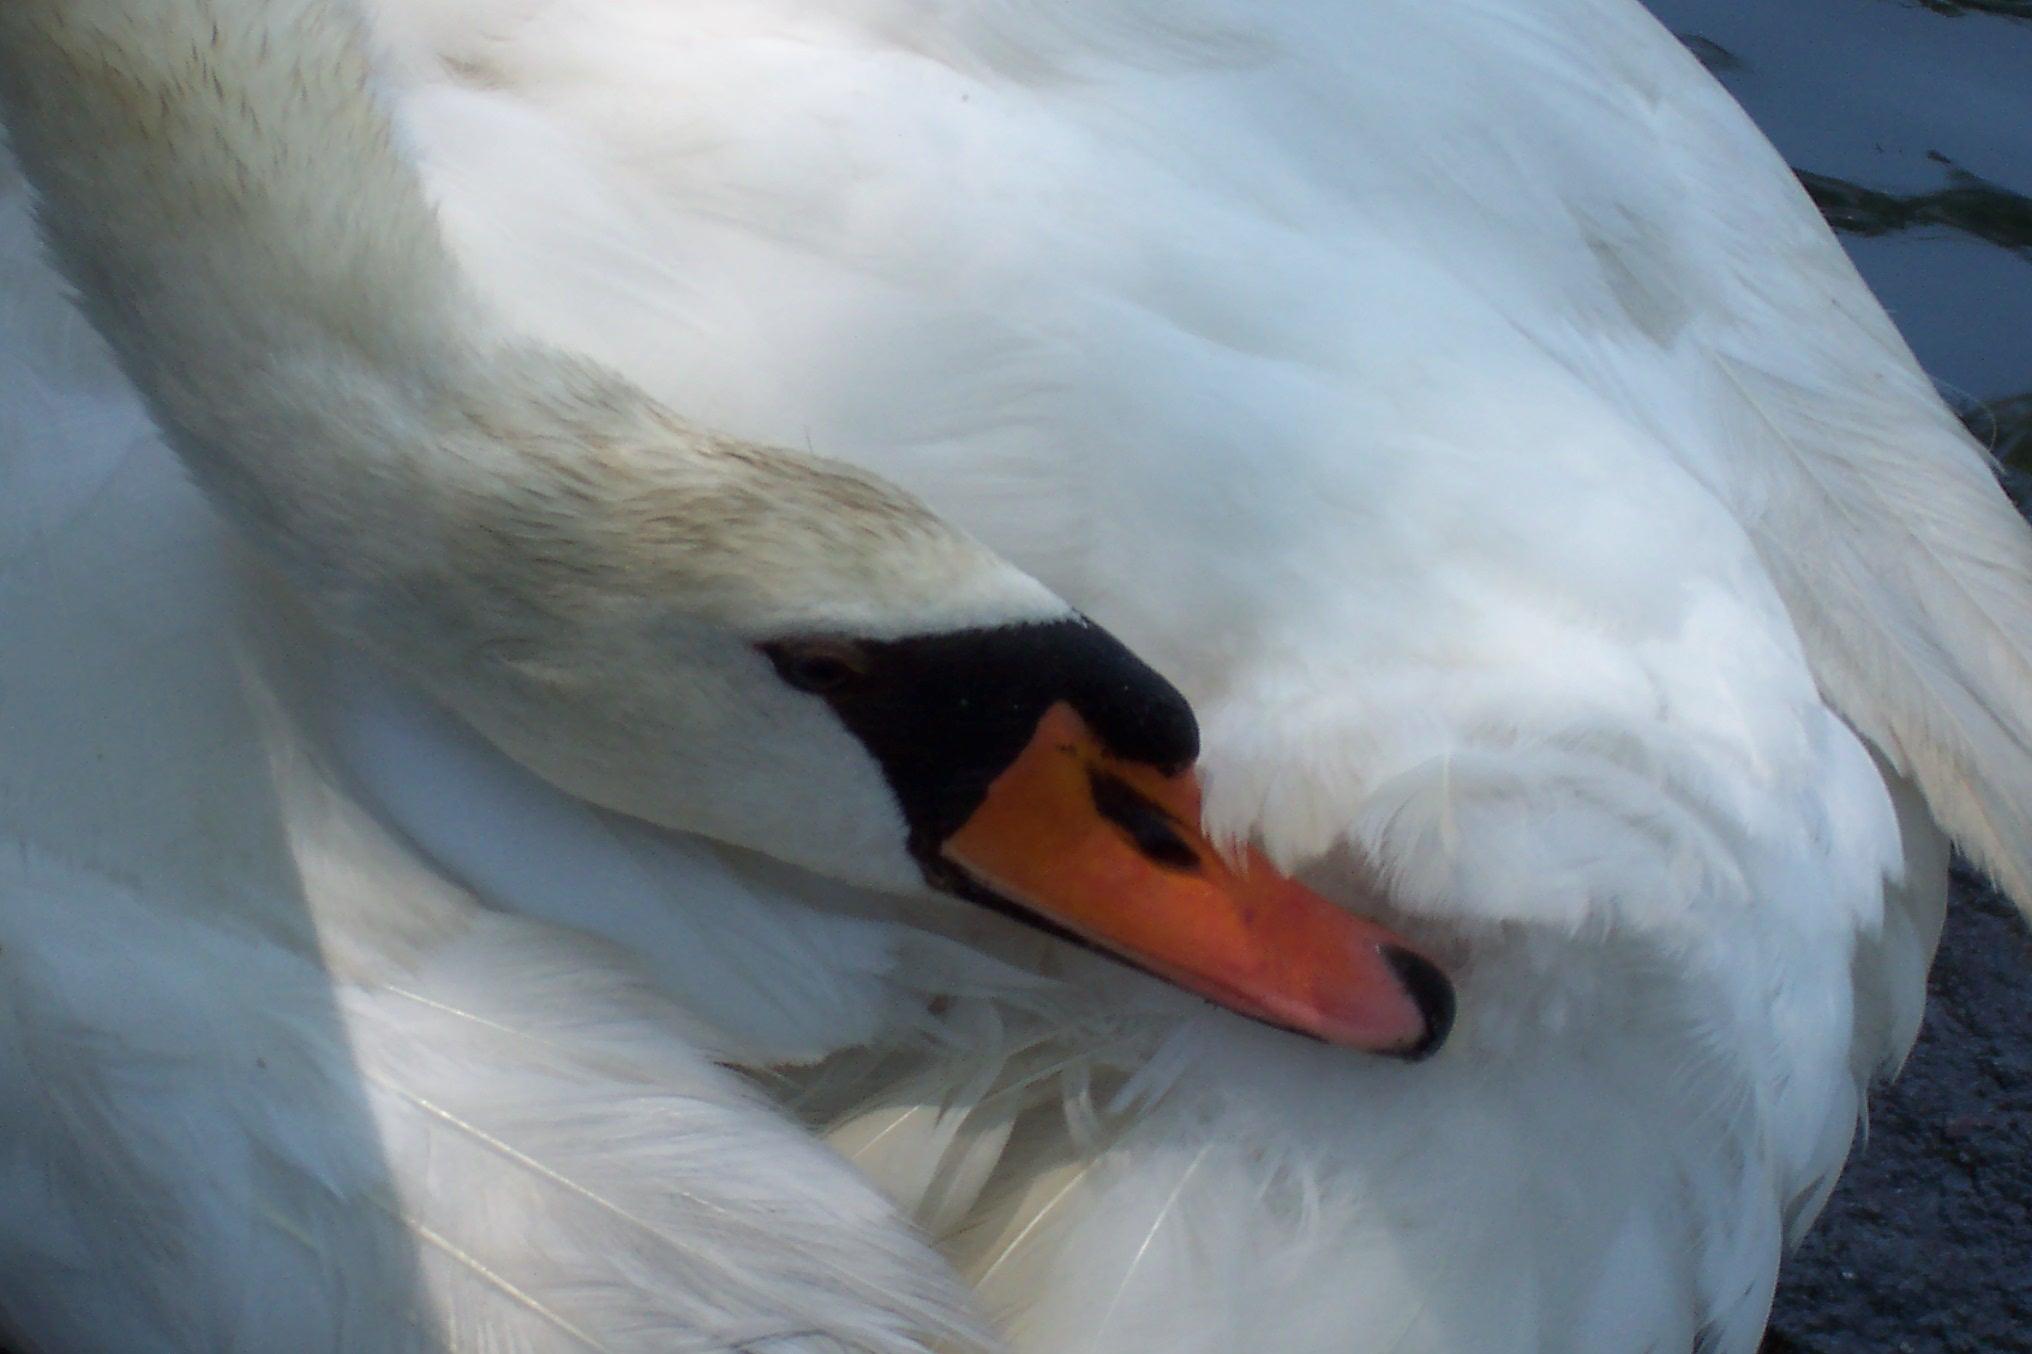 Swan at Mystic Village (user submitted)